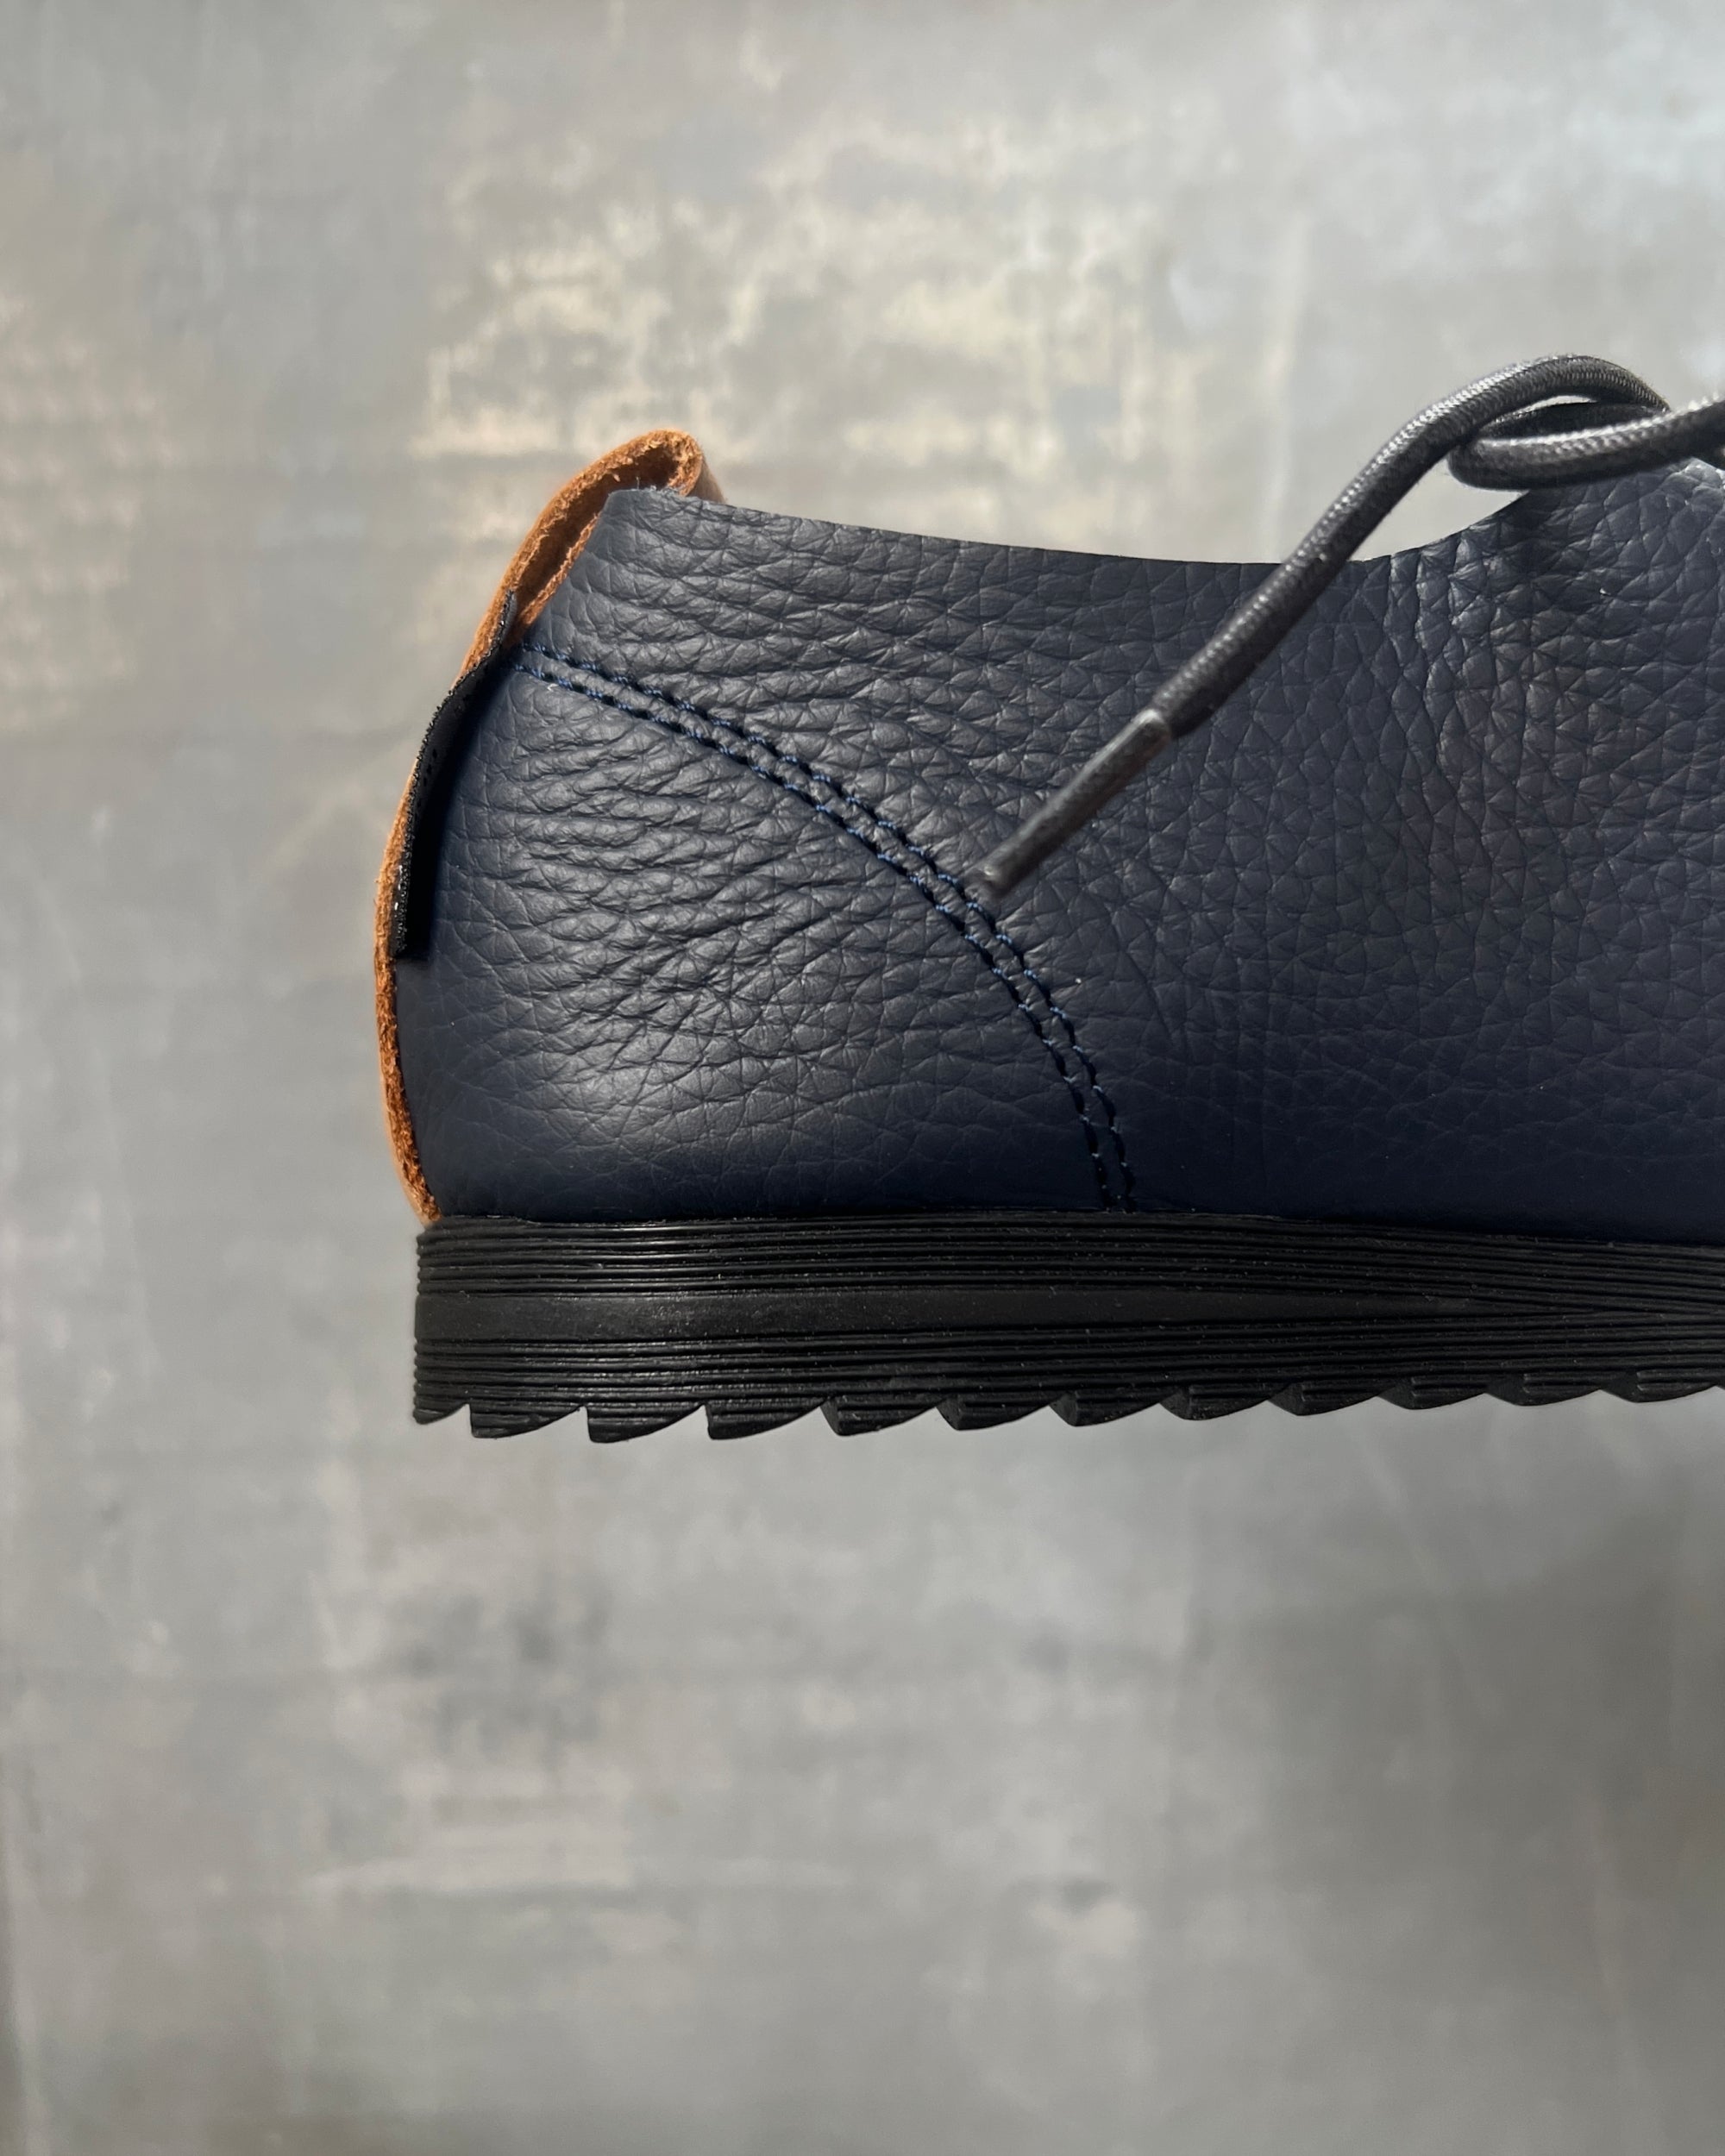 Japanese leather shoes, made to order for the maker hobart